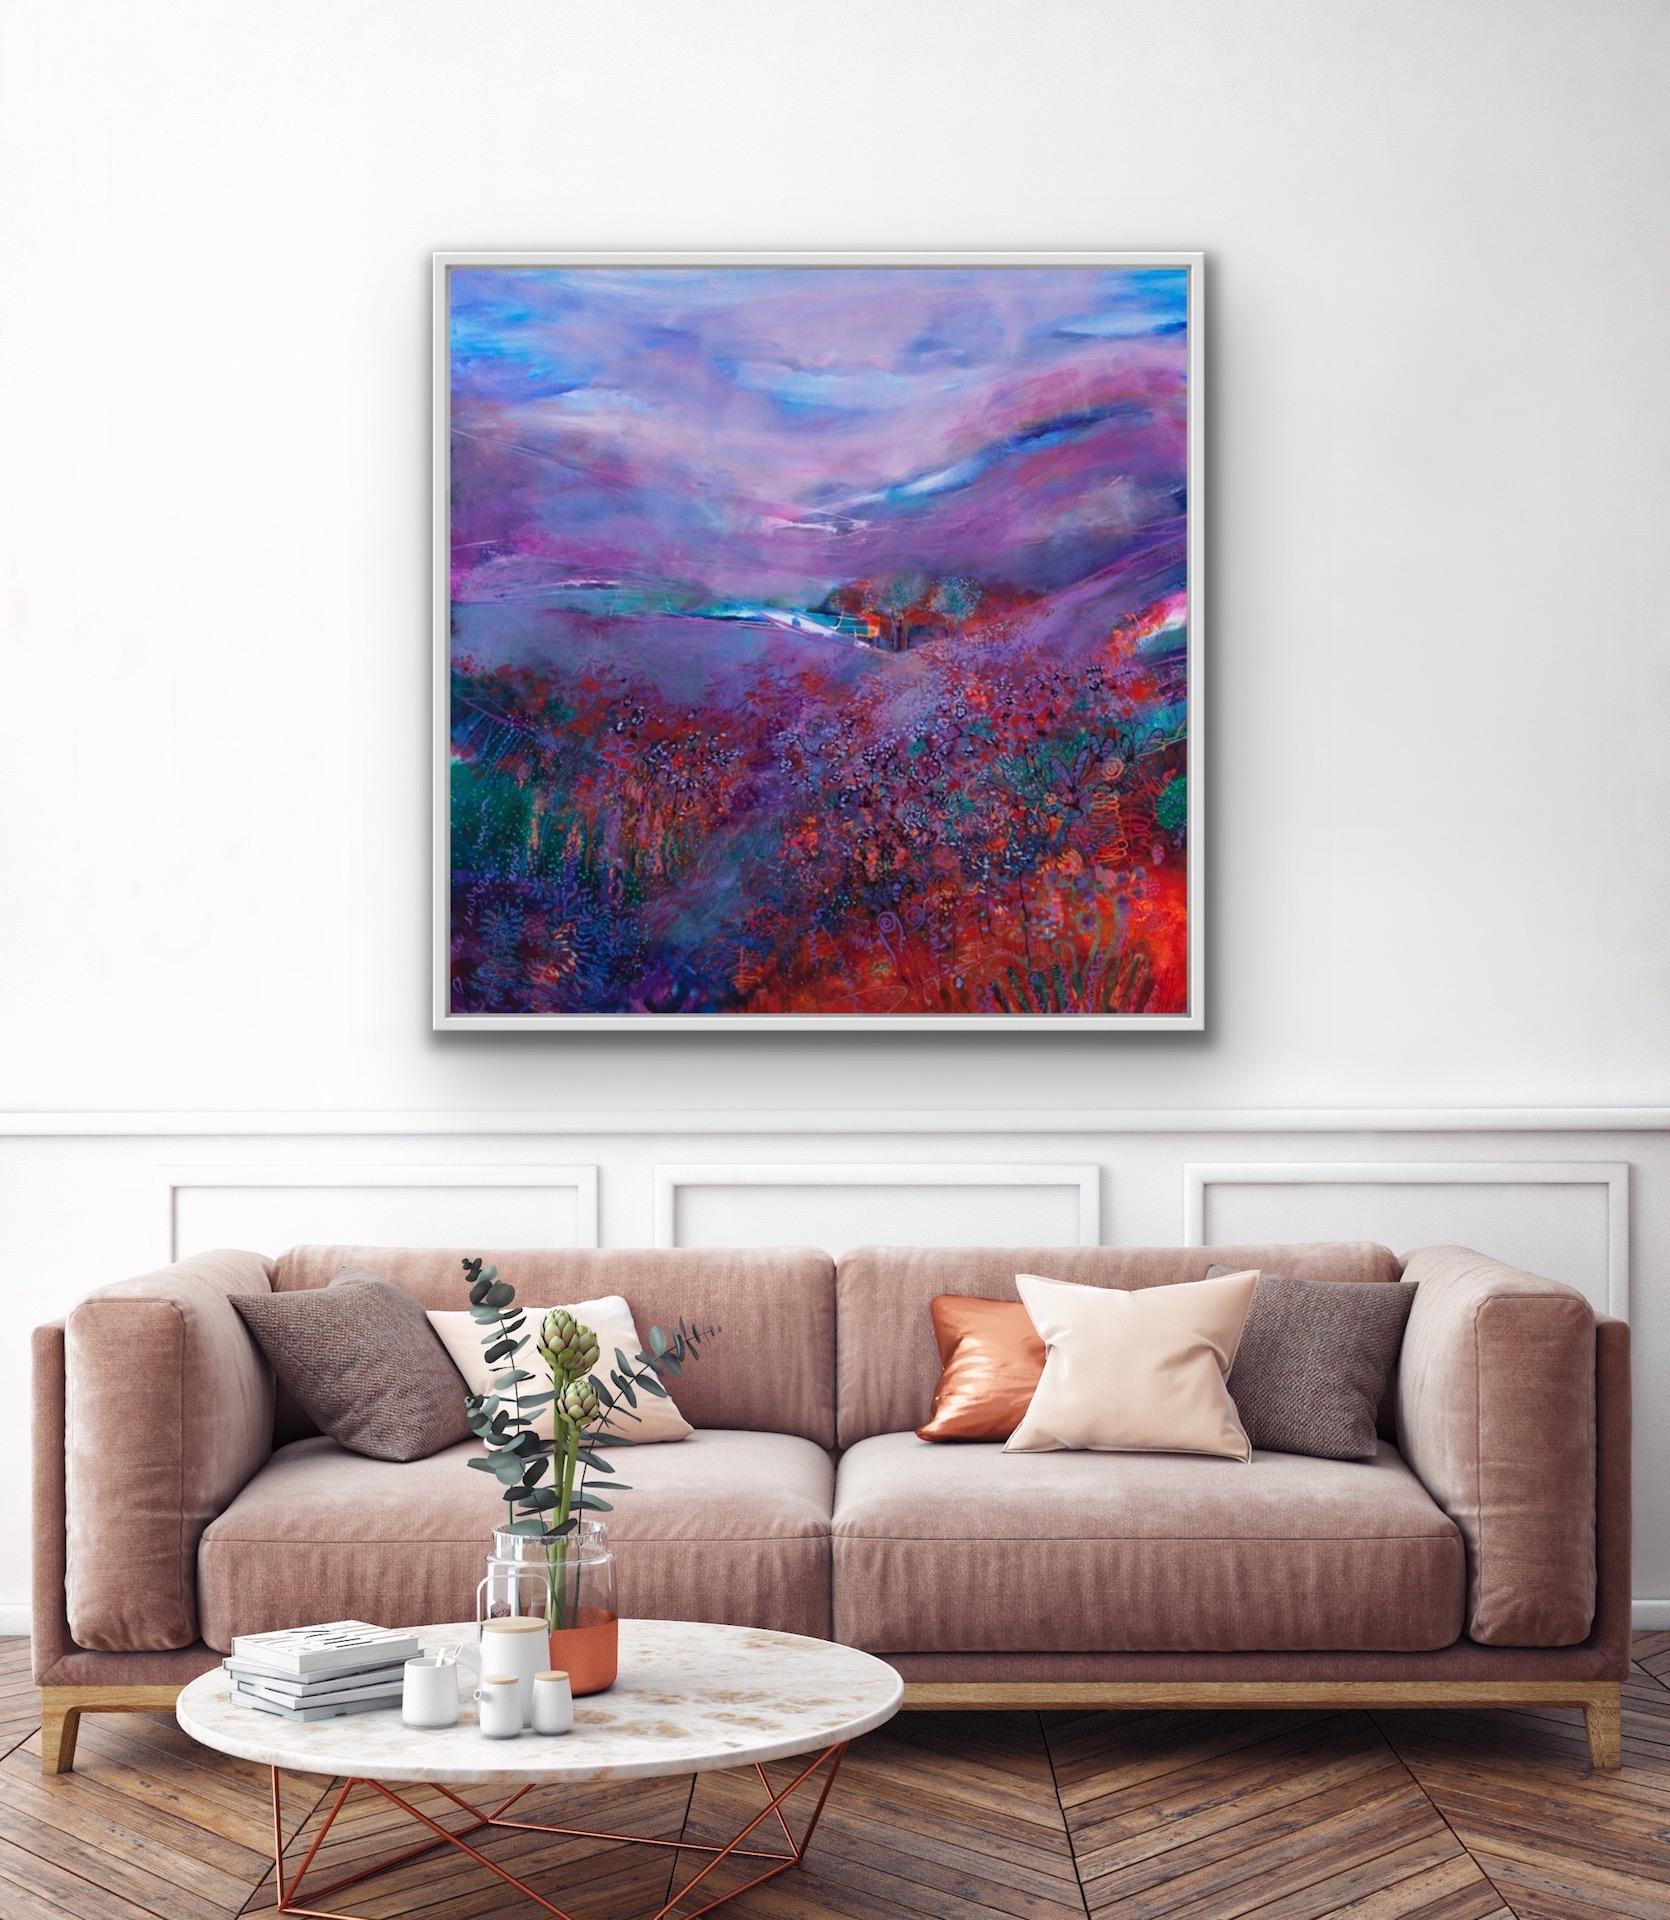 Jan Gardener
Contemplation, Earth to Heaven
Original Painting
Size: H 100cm x W 100cm
(Please note that in situ images are purely an indication of how a piece may look).

I find painting takes me into a world of contemplation, I like to prep my